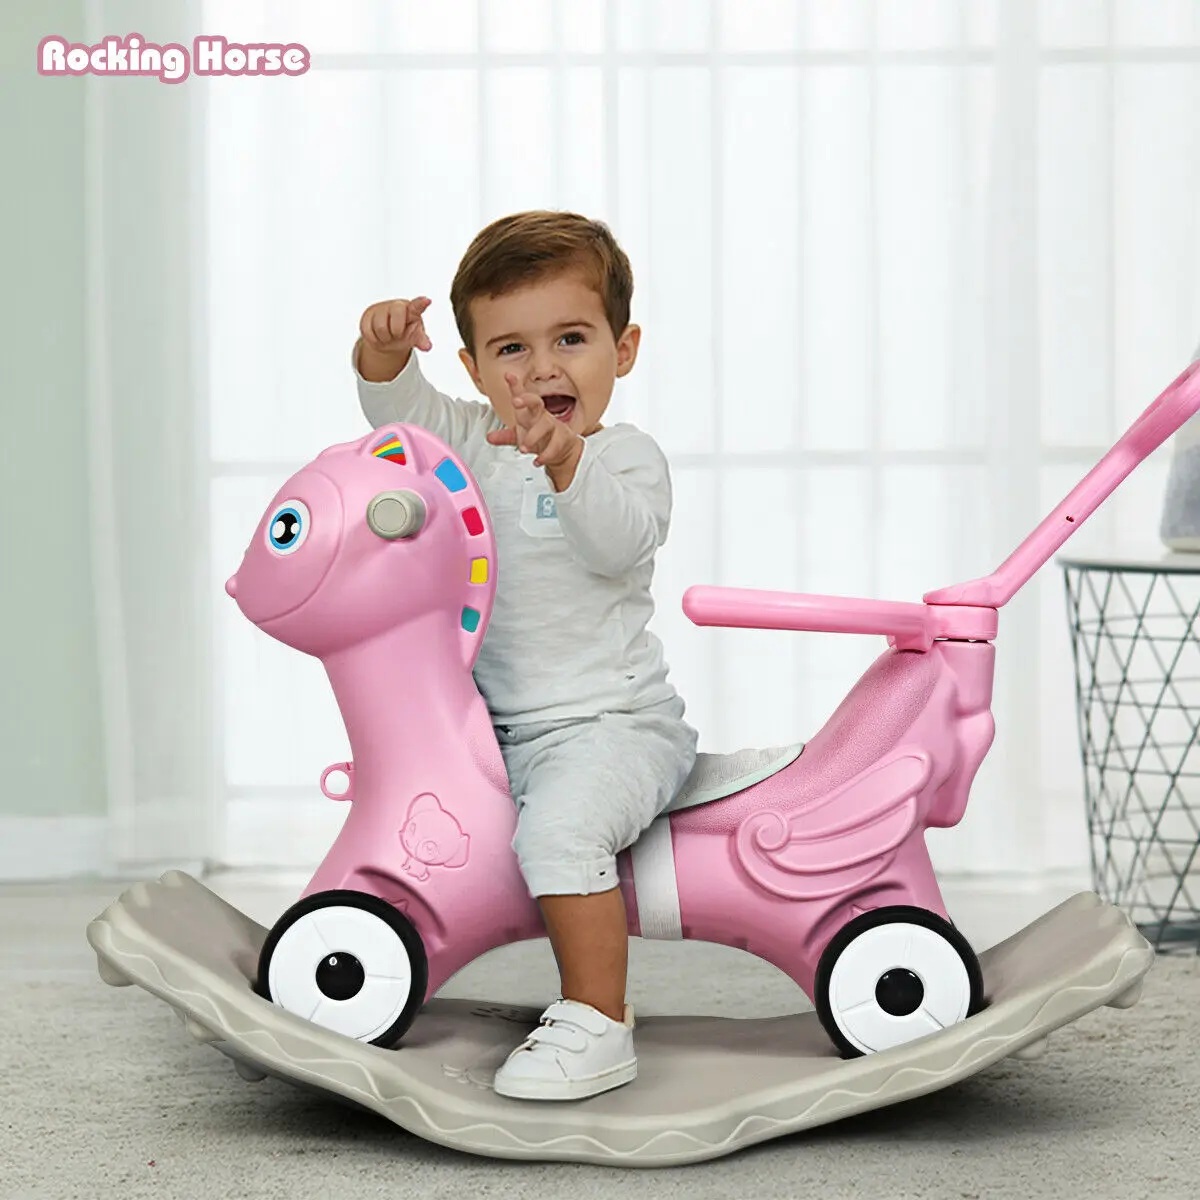 Baby Rocking Horse 4 in 1 Kids Ride On Toy Push Car with Music Indoor and Outdoor